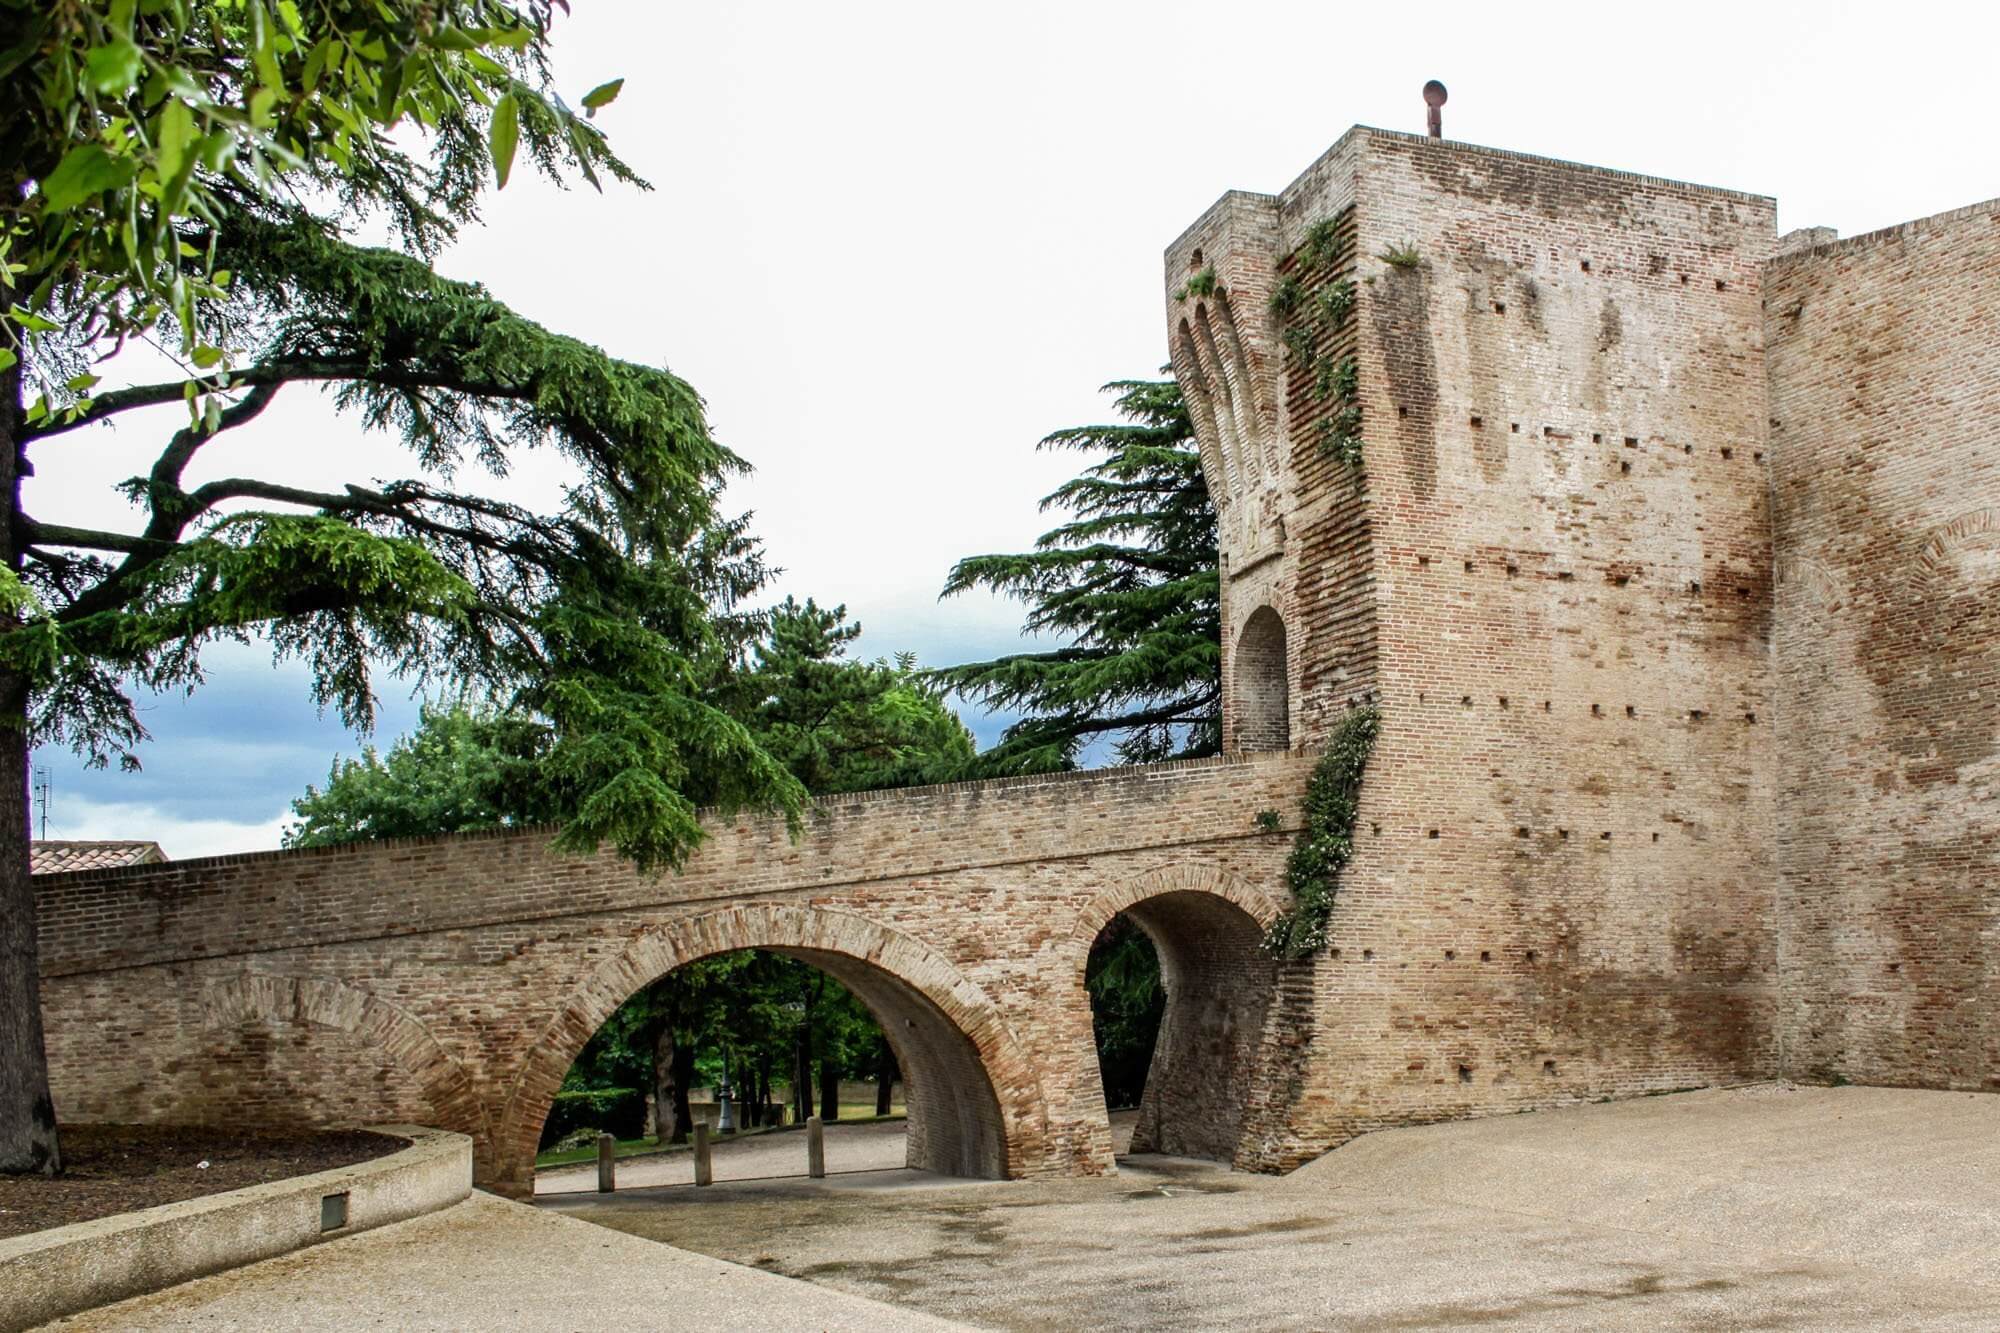 The Mondavio fortress tower grading the walkway, with the keep in the background